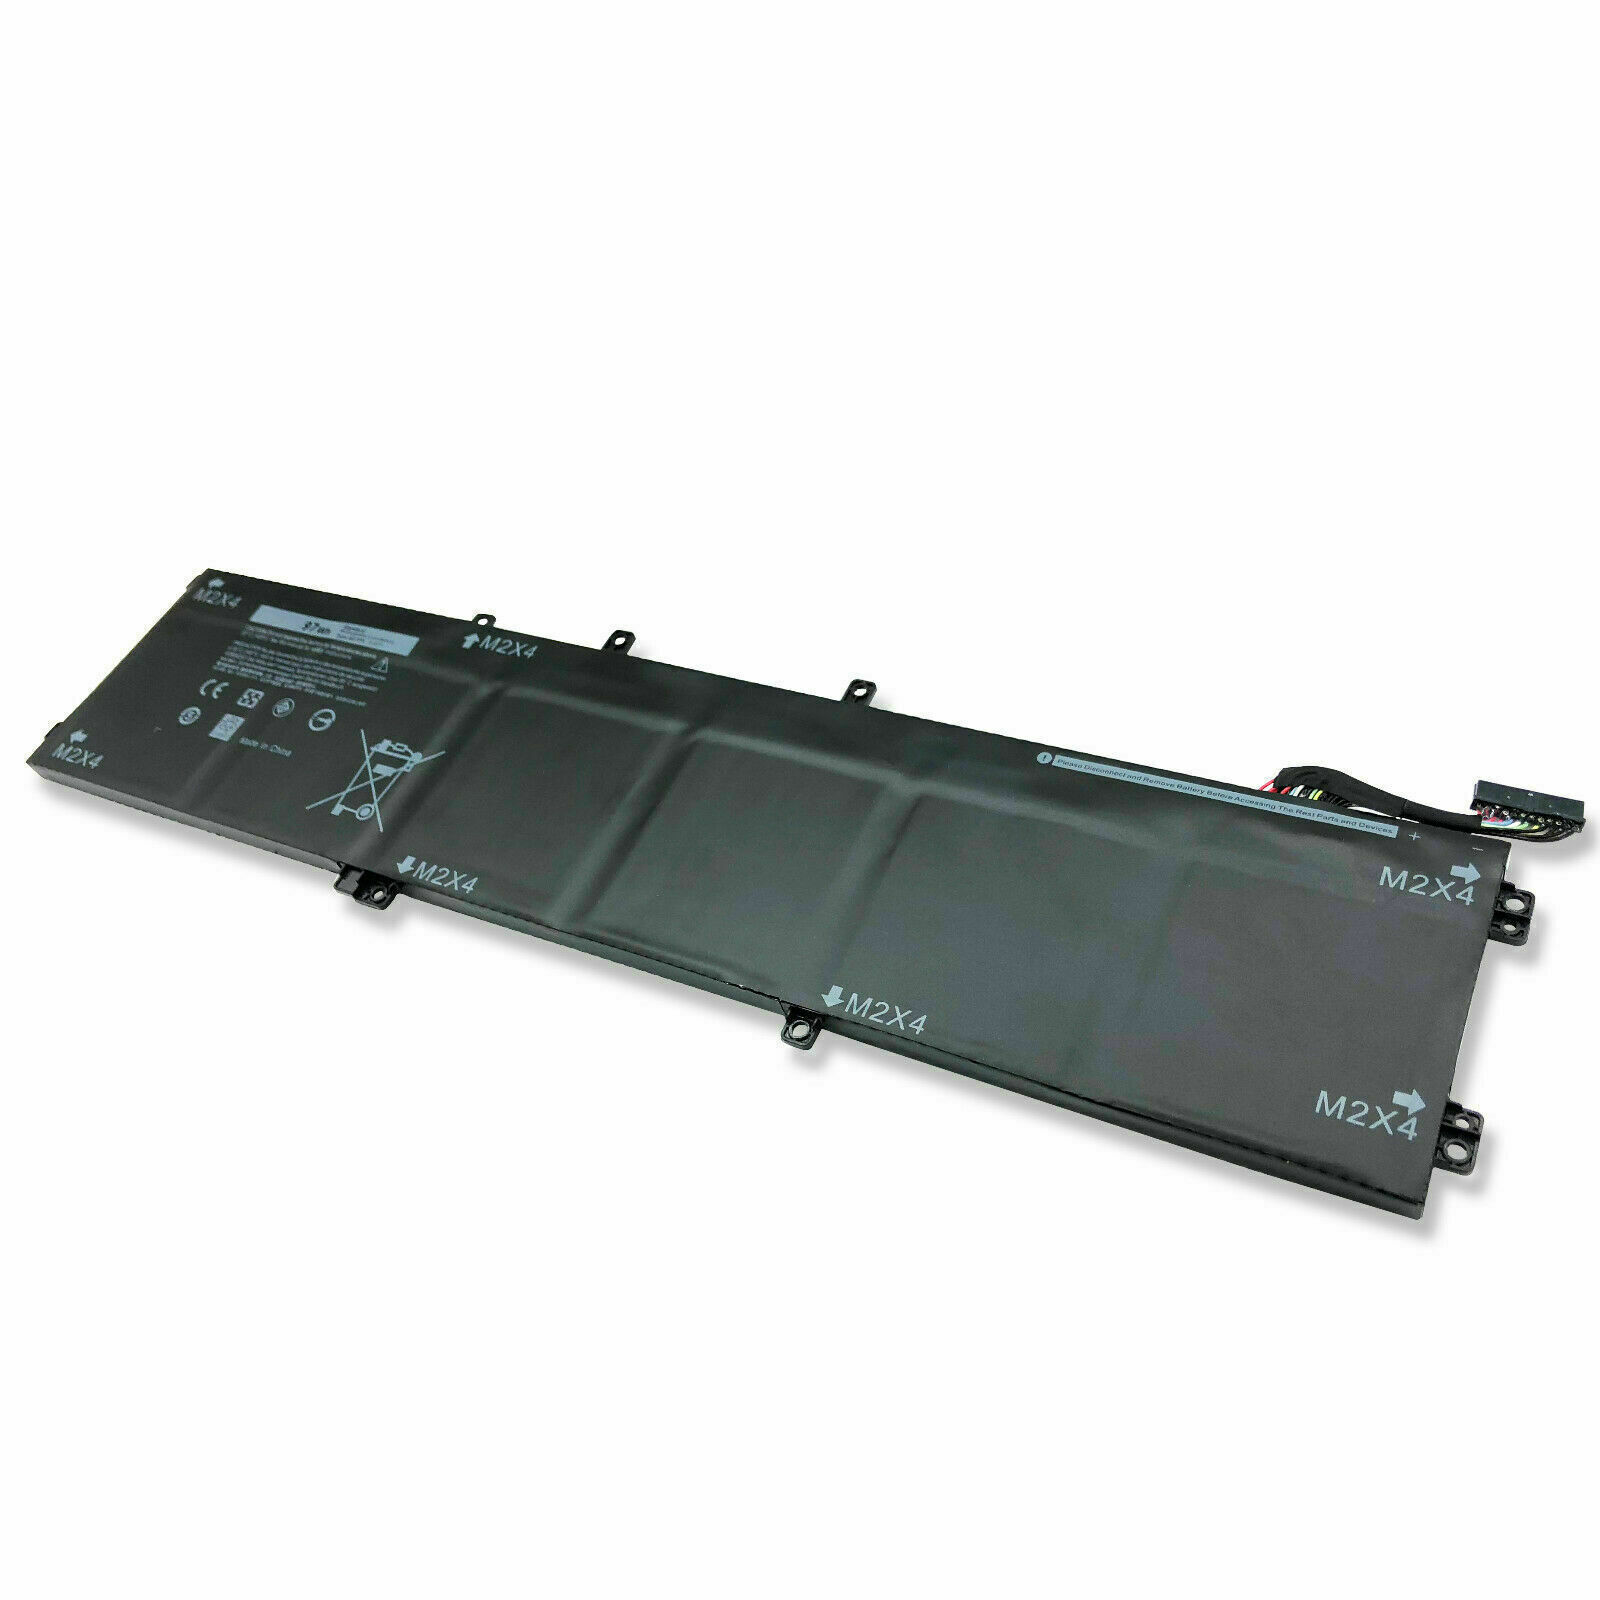 97WH Battery for Dell Precision 15 5510 5520 5530 5540 M5510 M5520 Workstation